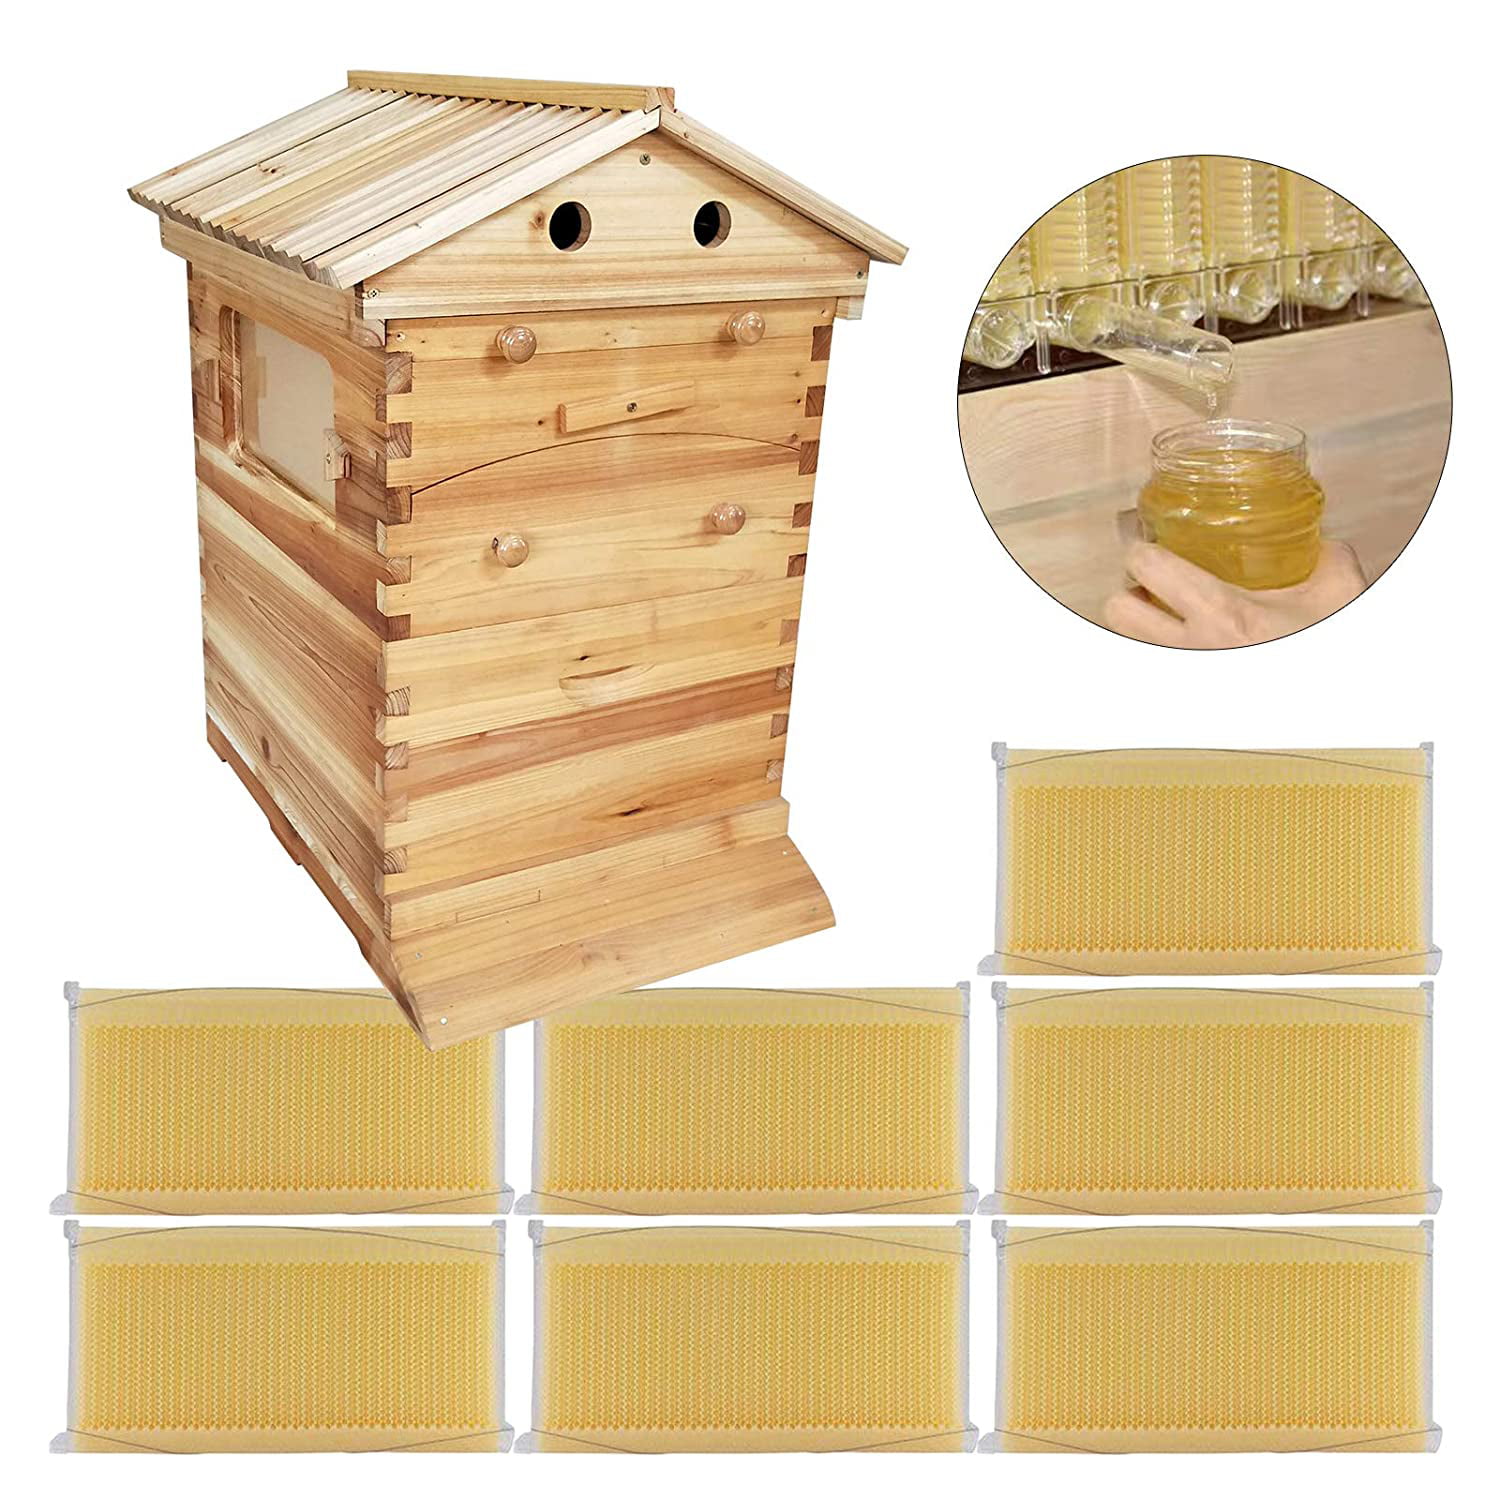 Details about   WOODEN BEEKEEPING BEEHIVE HOUSE W/ 7PCS UPGRADED AUTO BEE COMB HIVE FRAMES 